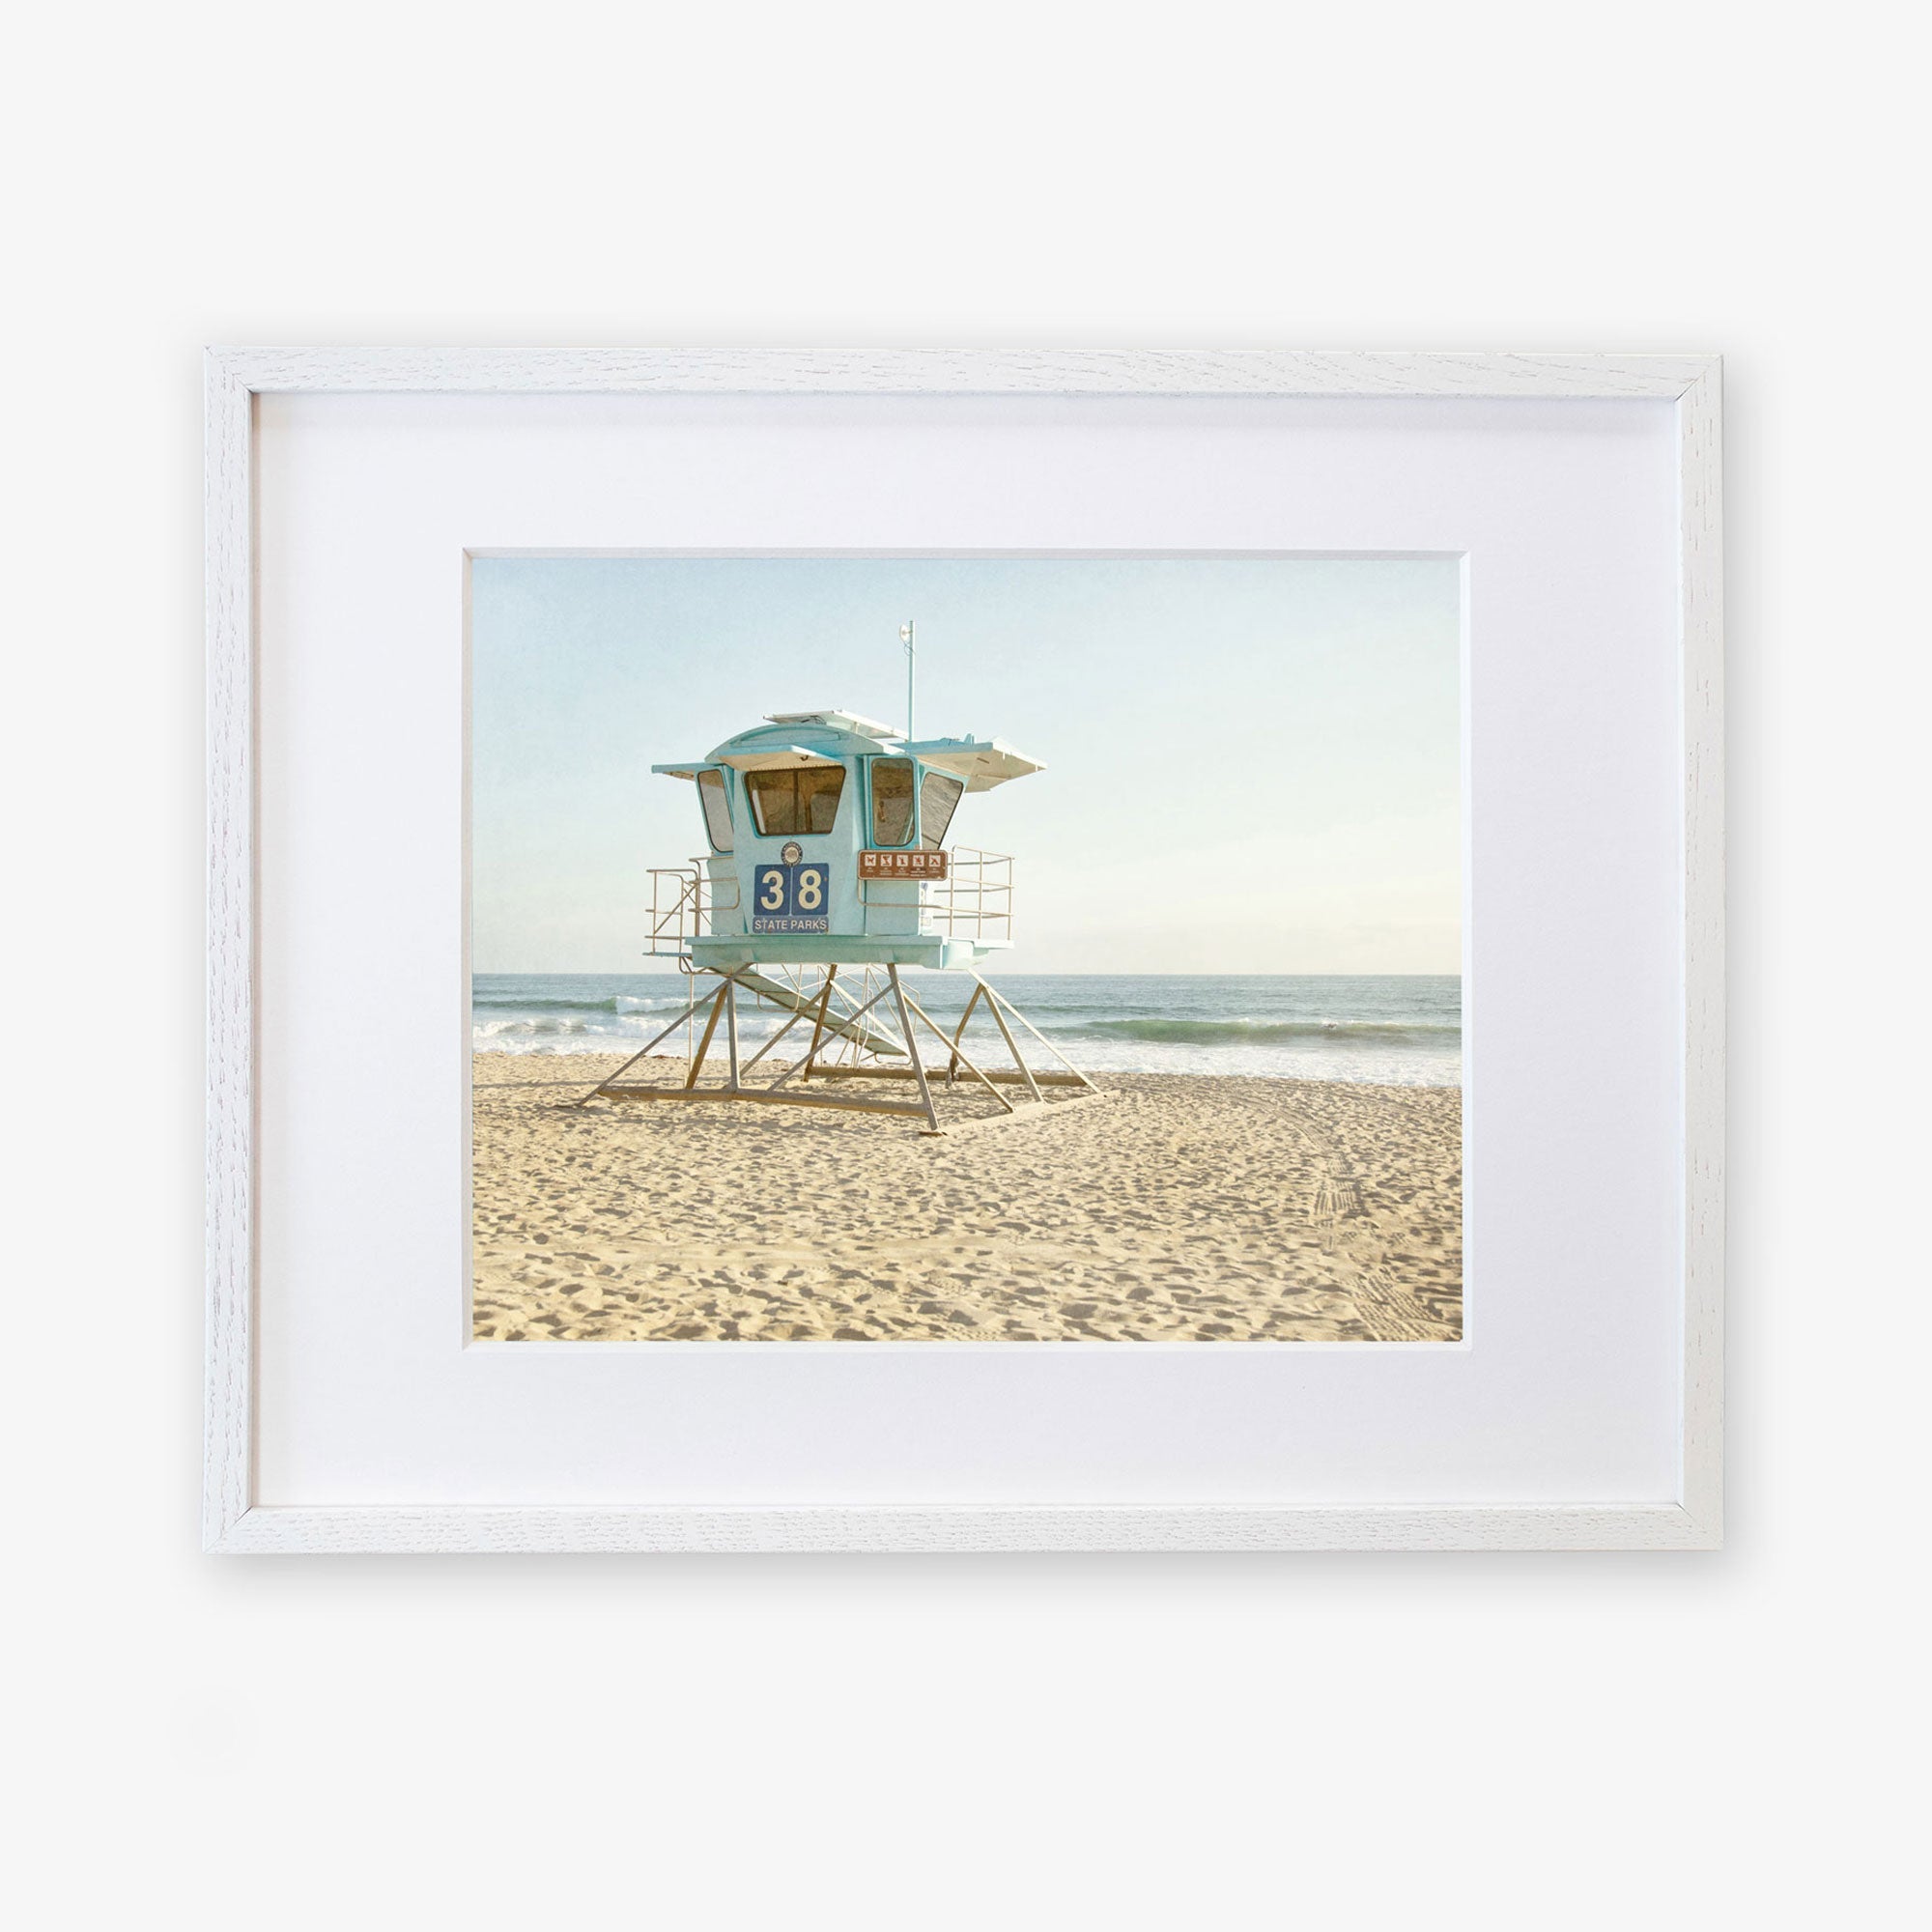 An unframed photograph of a lifeguard tower numbered 38 on a sandy beach, with the ocean in the background under a clear sky. The Offley Green &#39;California Coastal Print, Carlsbad Lifeguard Tower&#39; exemplifies a serene beach setting.